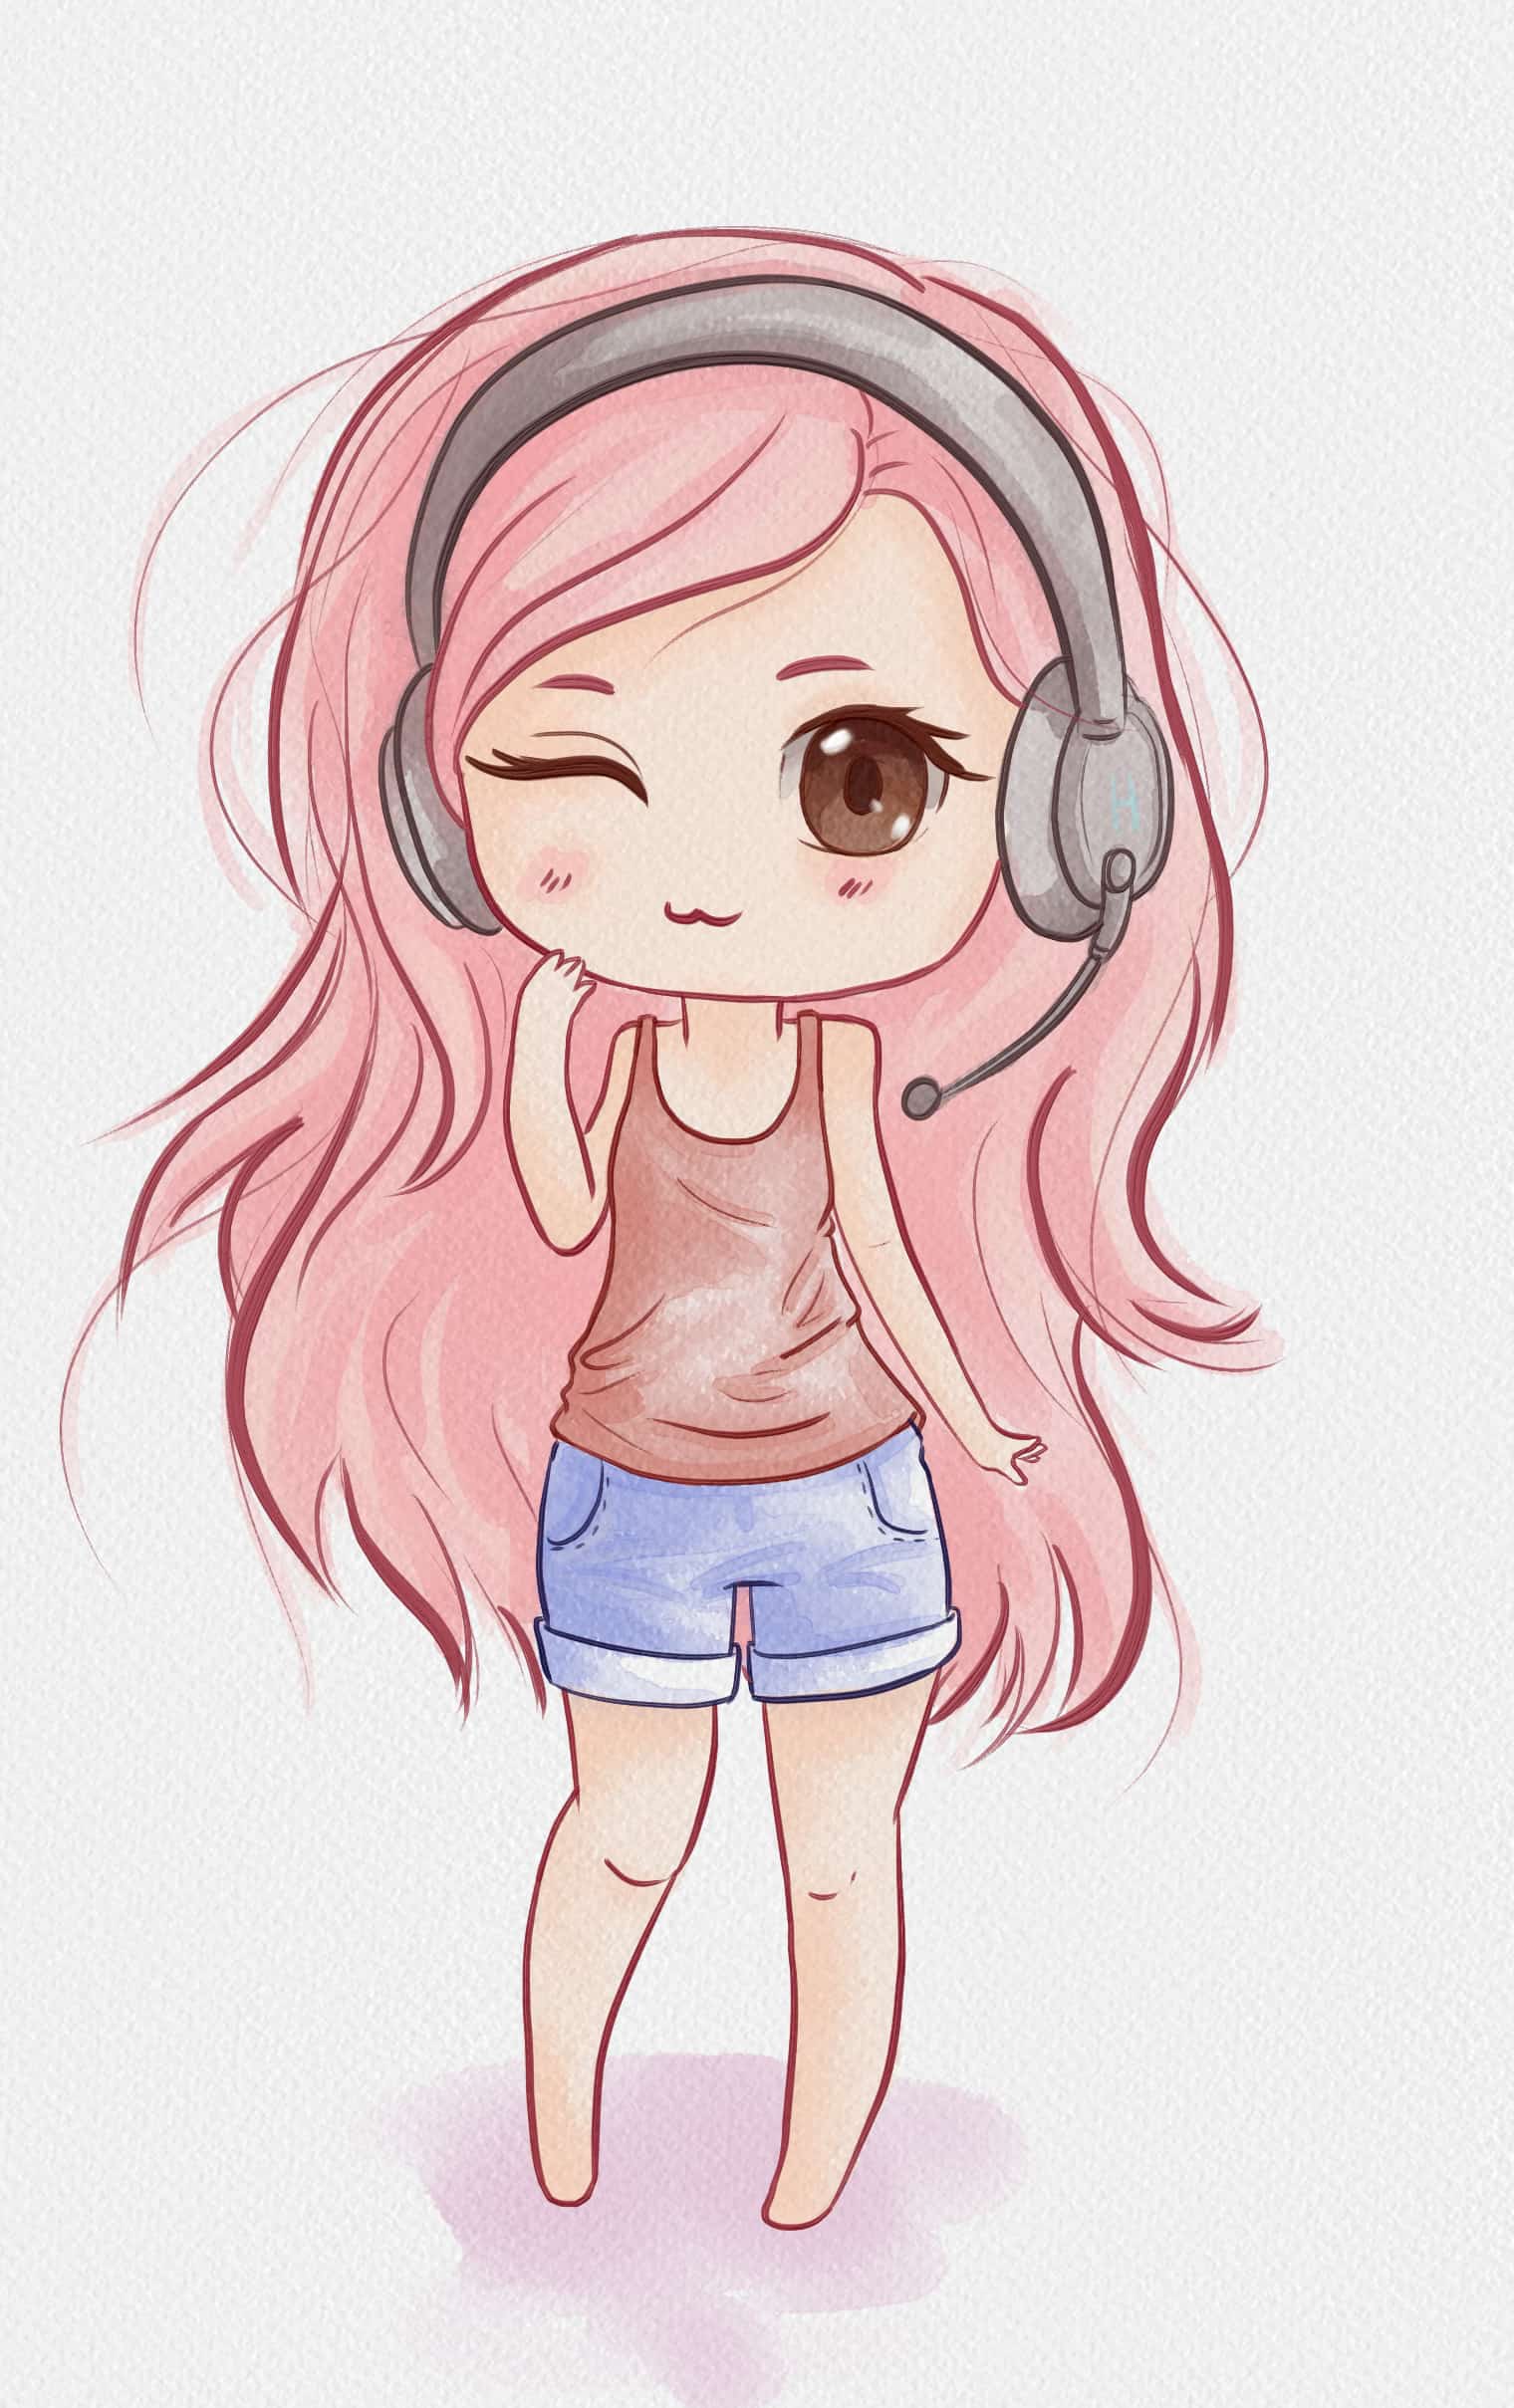 A cute drawing of a chibi girl with brown hair and a pink shirt.